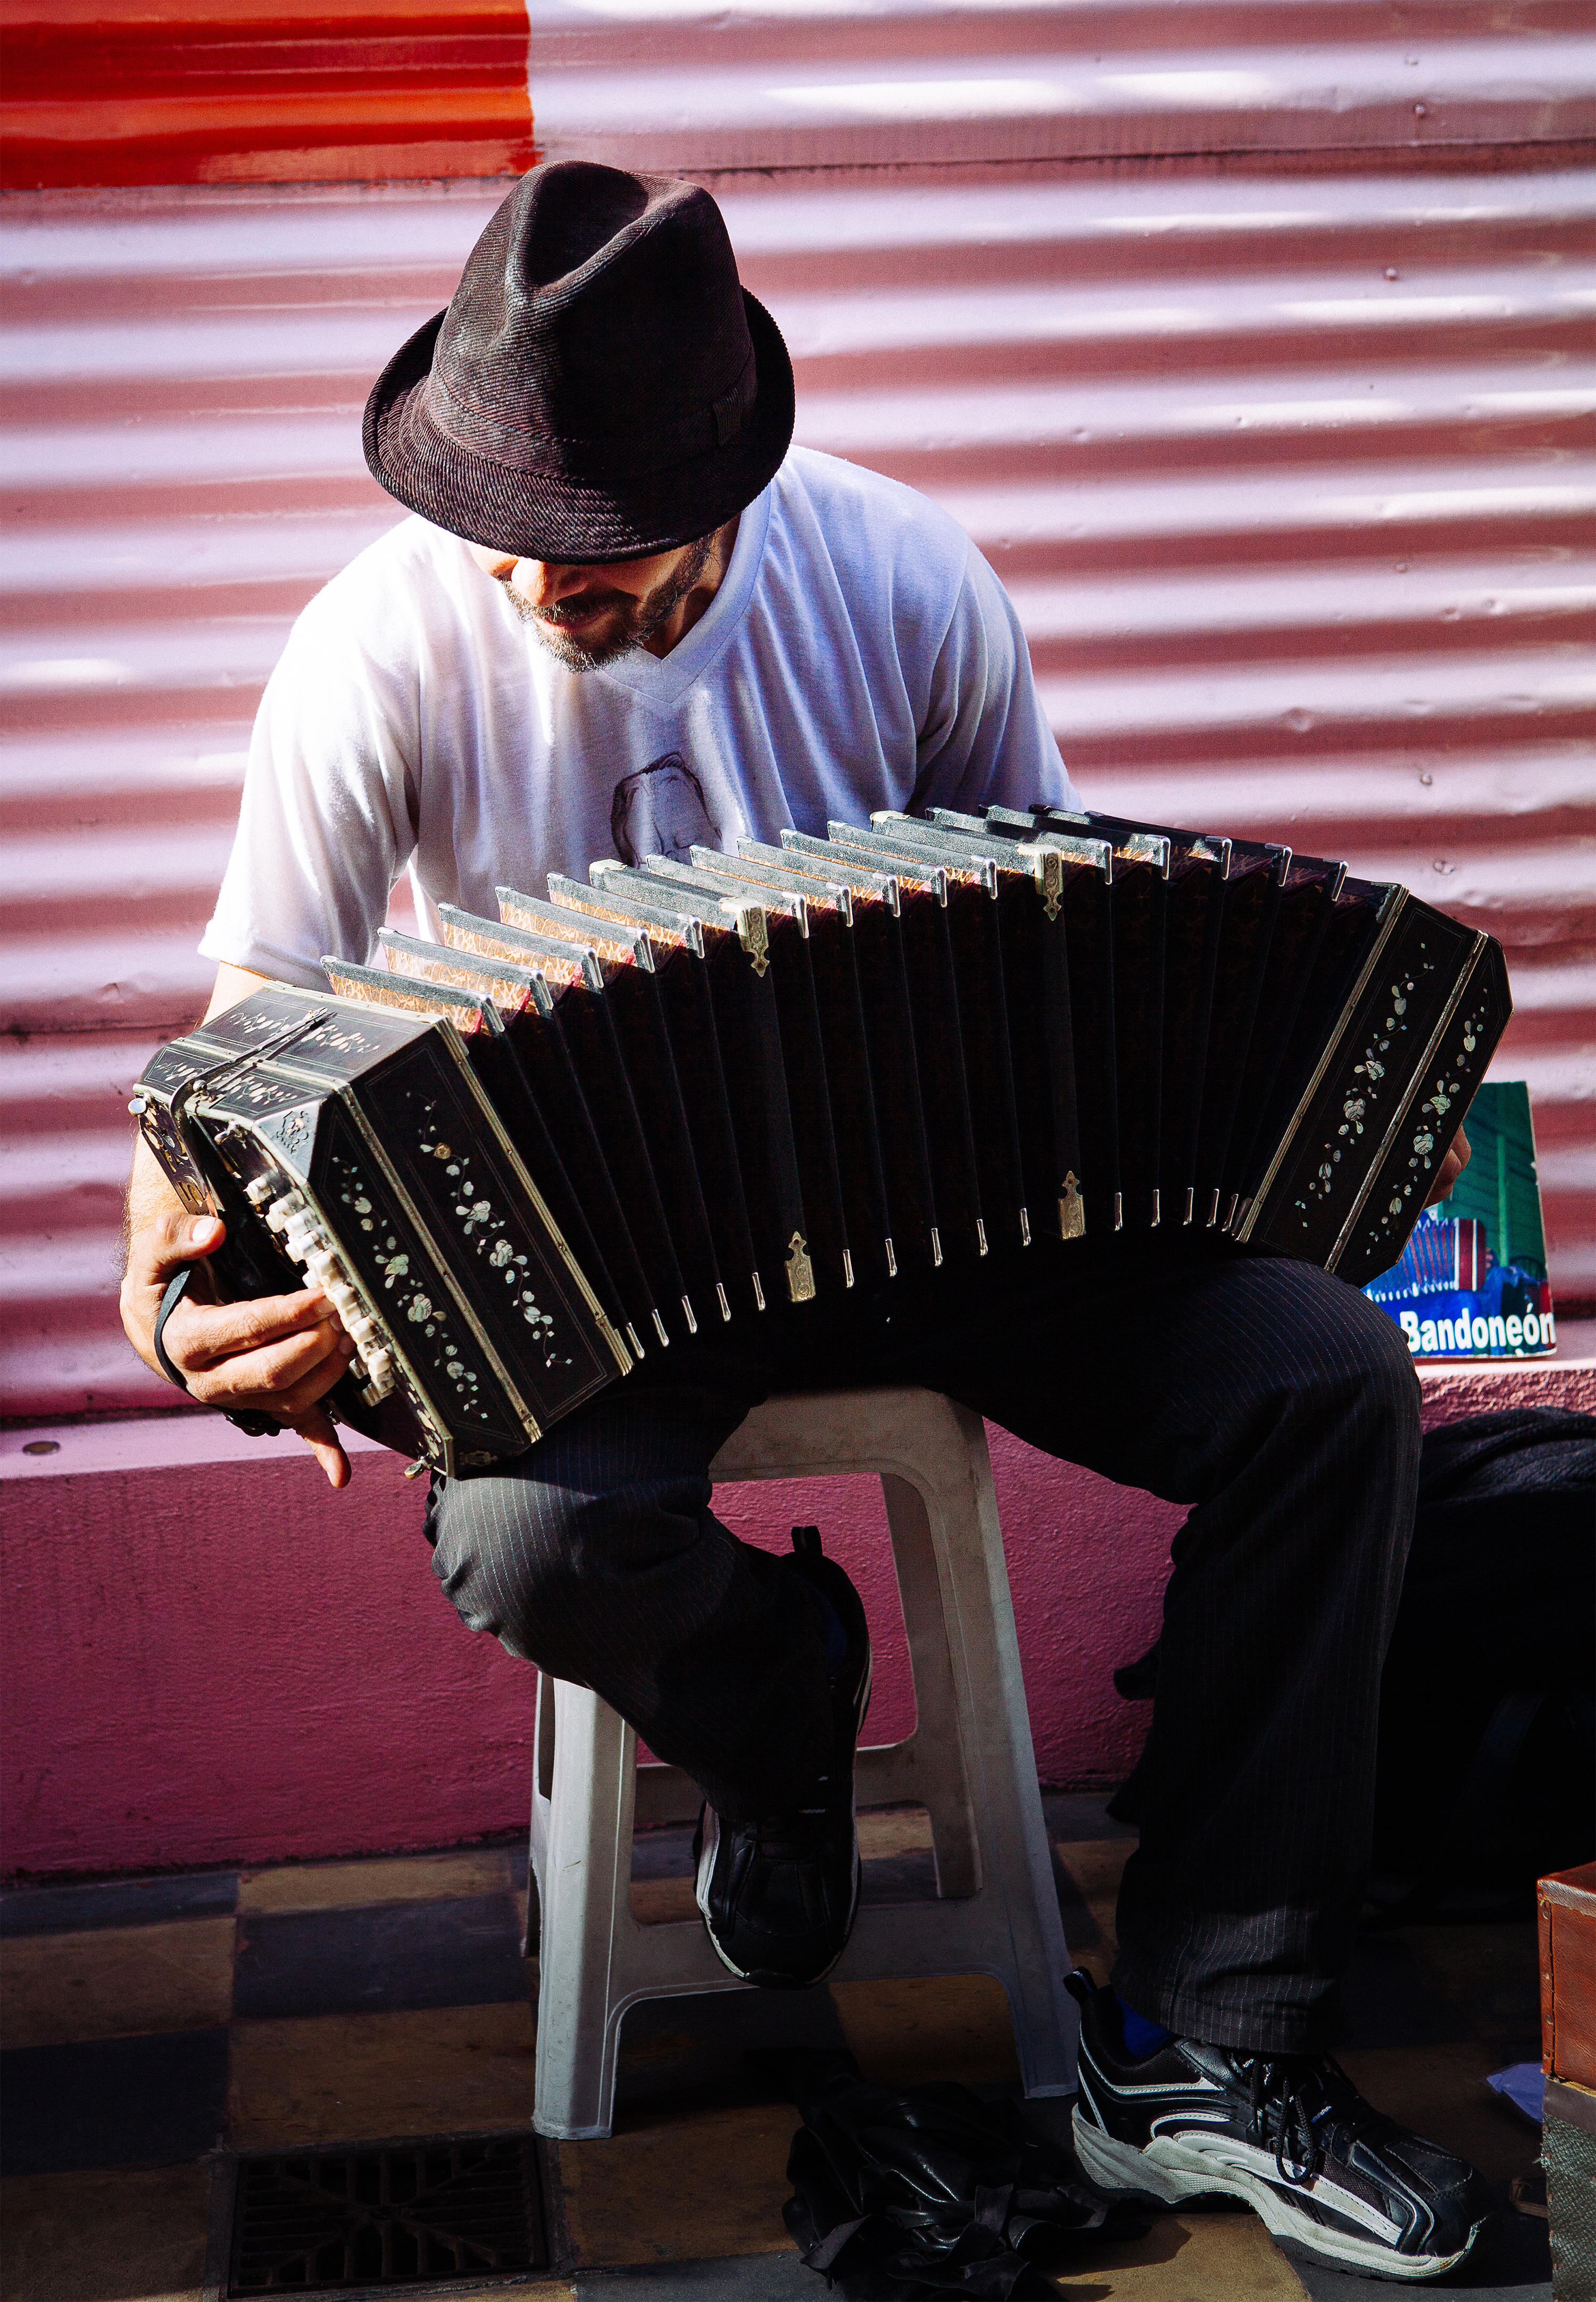 Domingo, a bandoneonista sitting on a stool and playing the bandoneon 